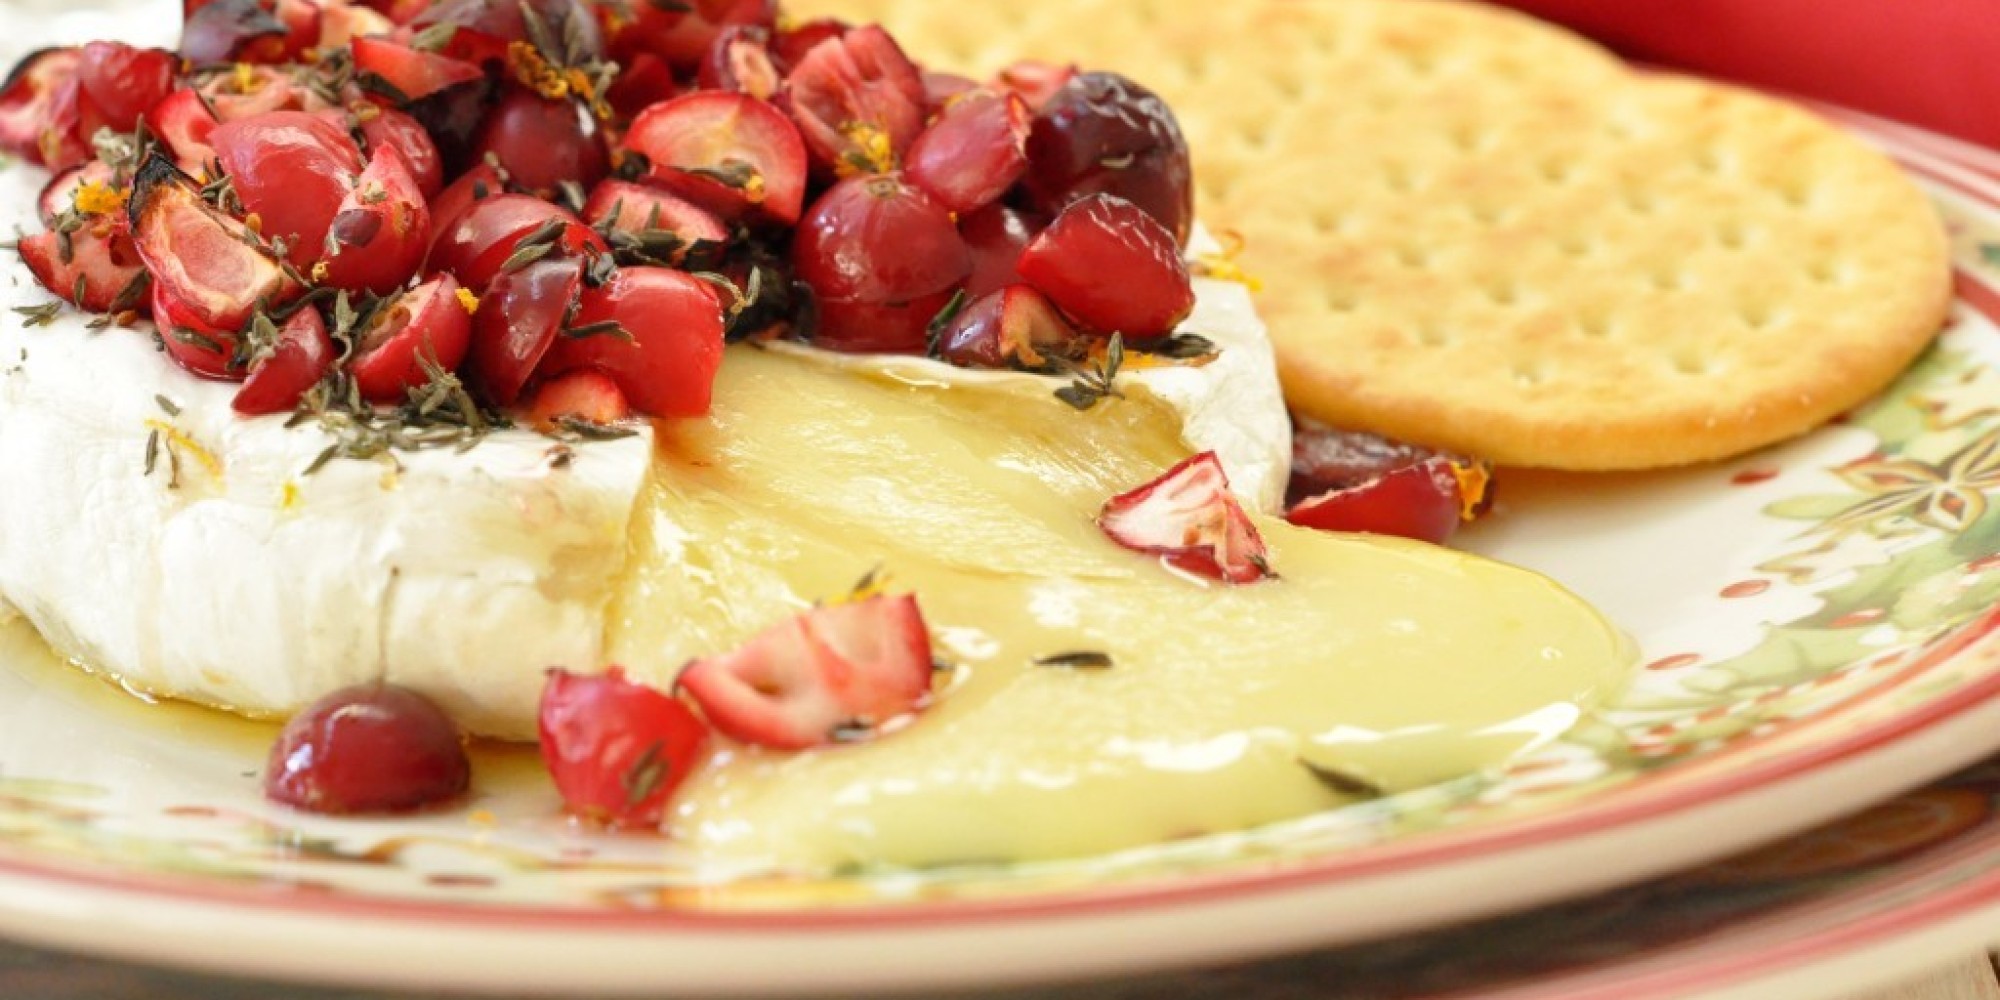 o-BAKED-BRIE-RECIPES-APPETIZERS-facebook.jpg